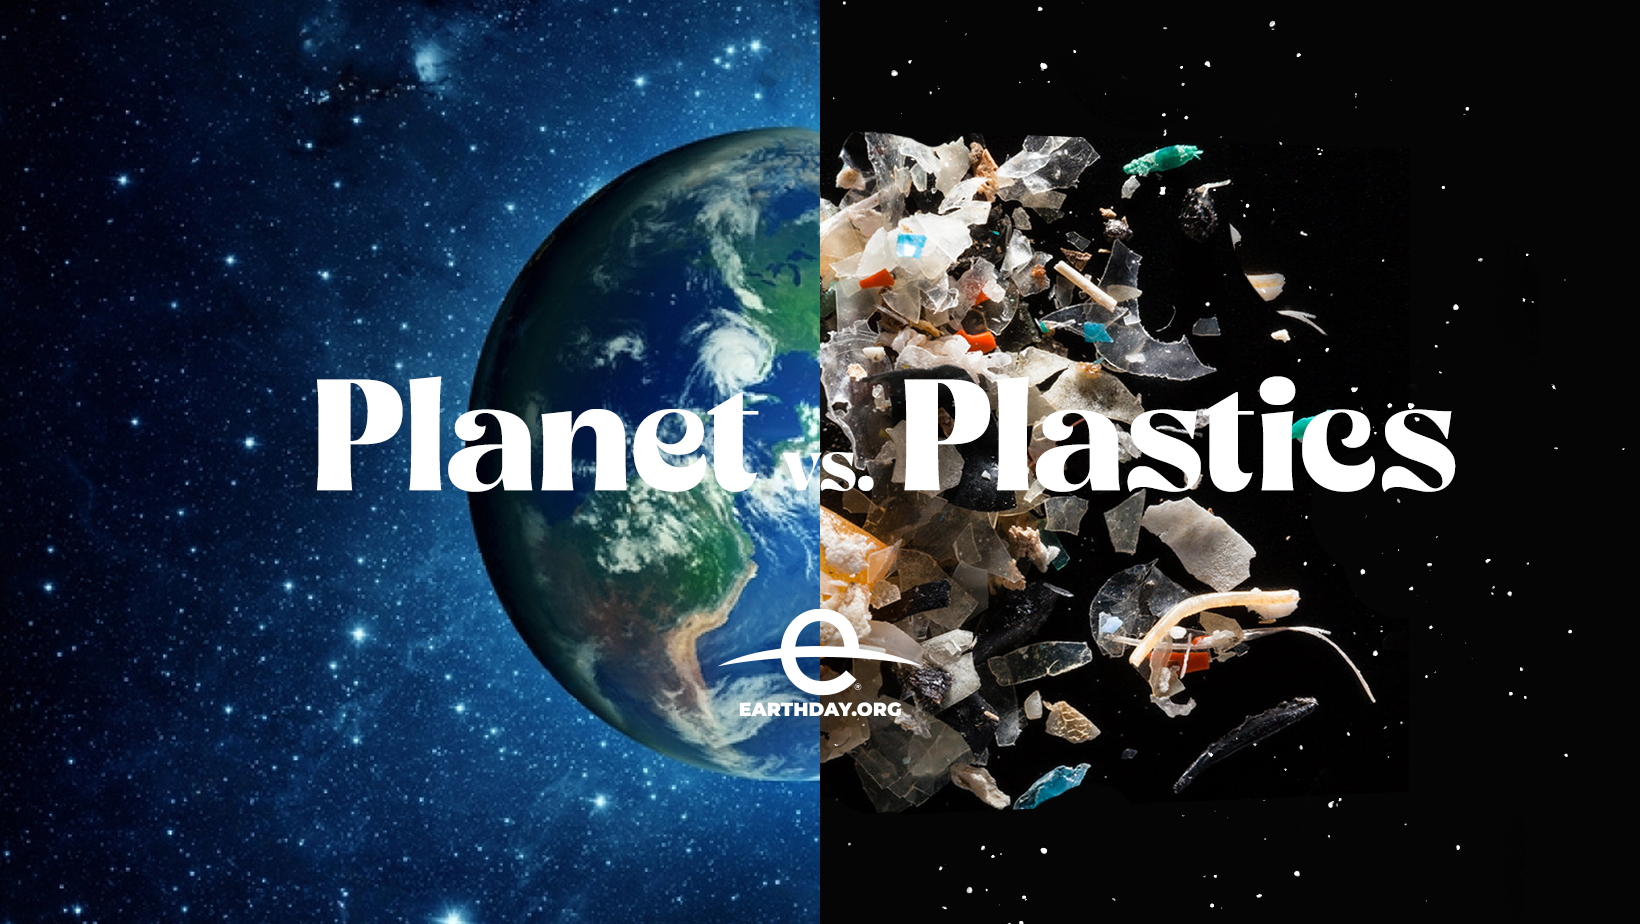 Planet vs Plastic earth and plastic waste image